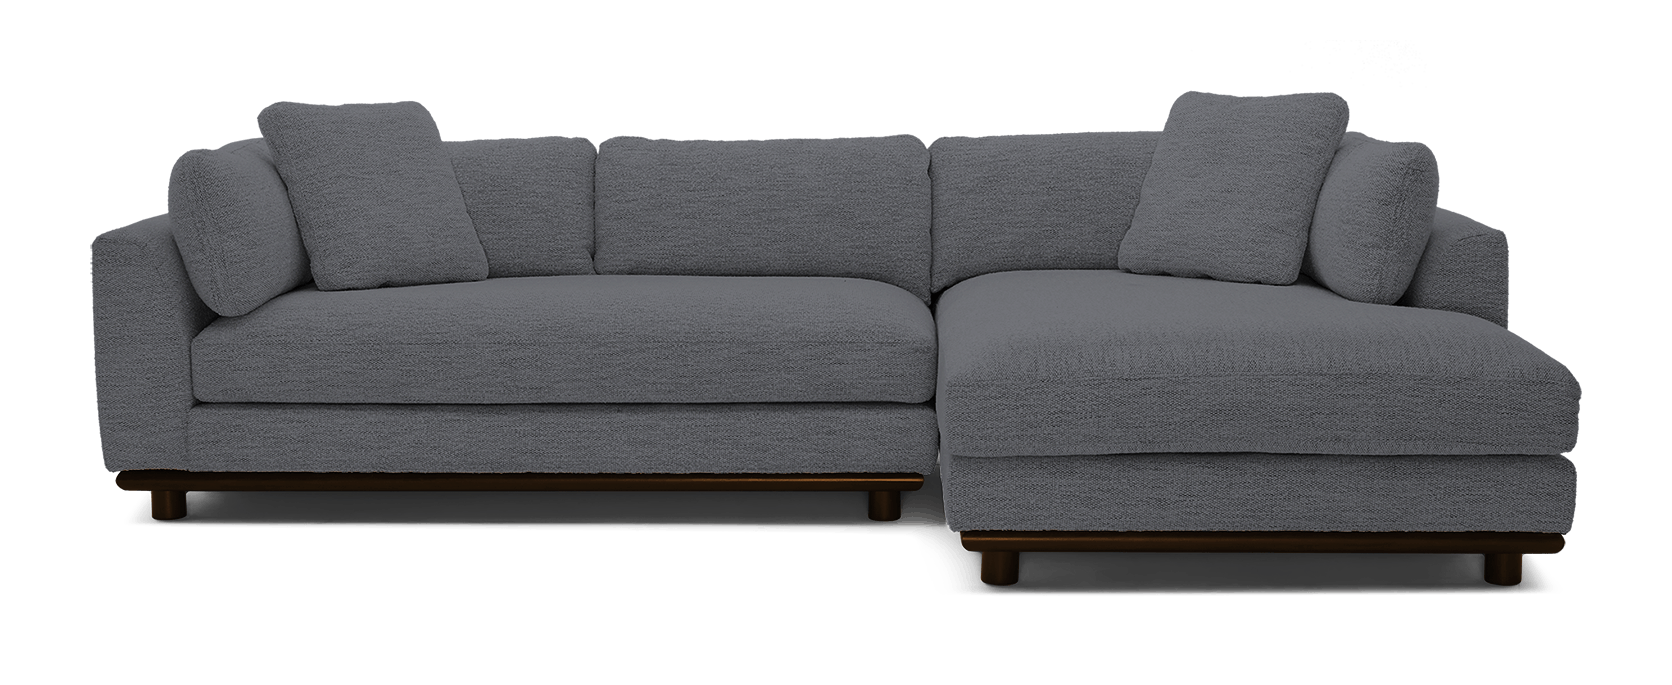 miller double chaise sectional essence ash